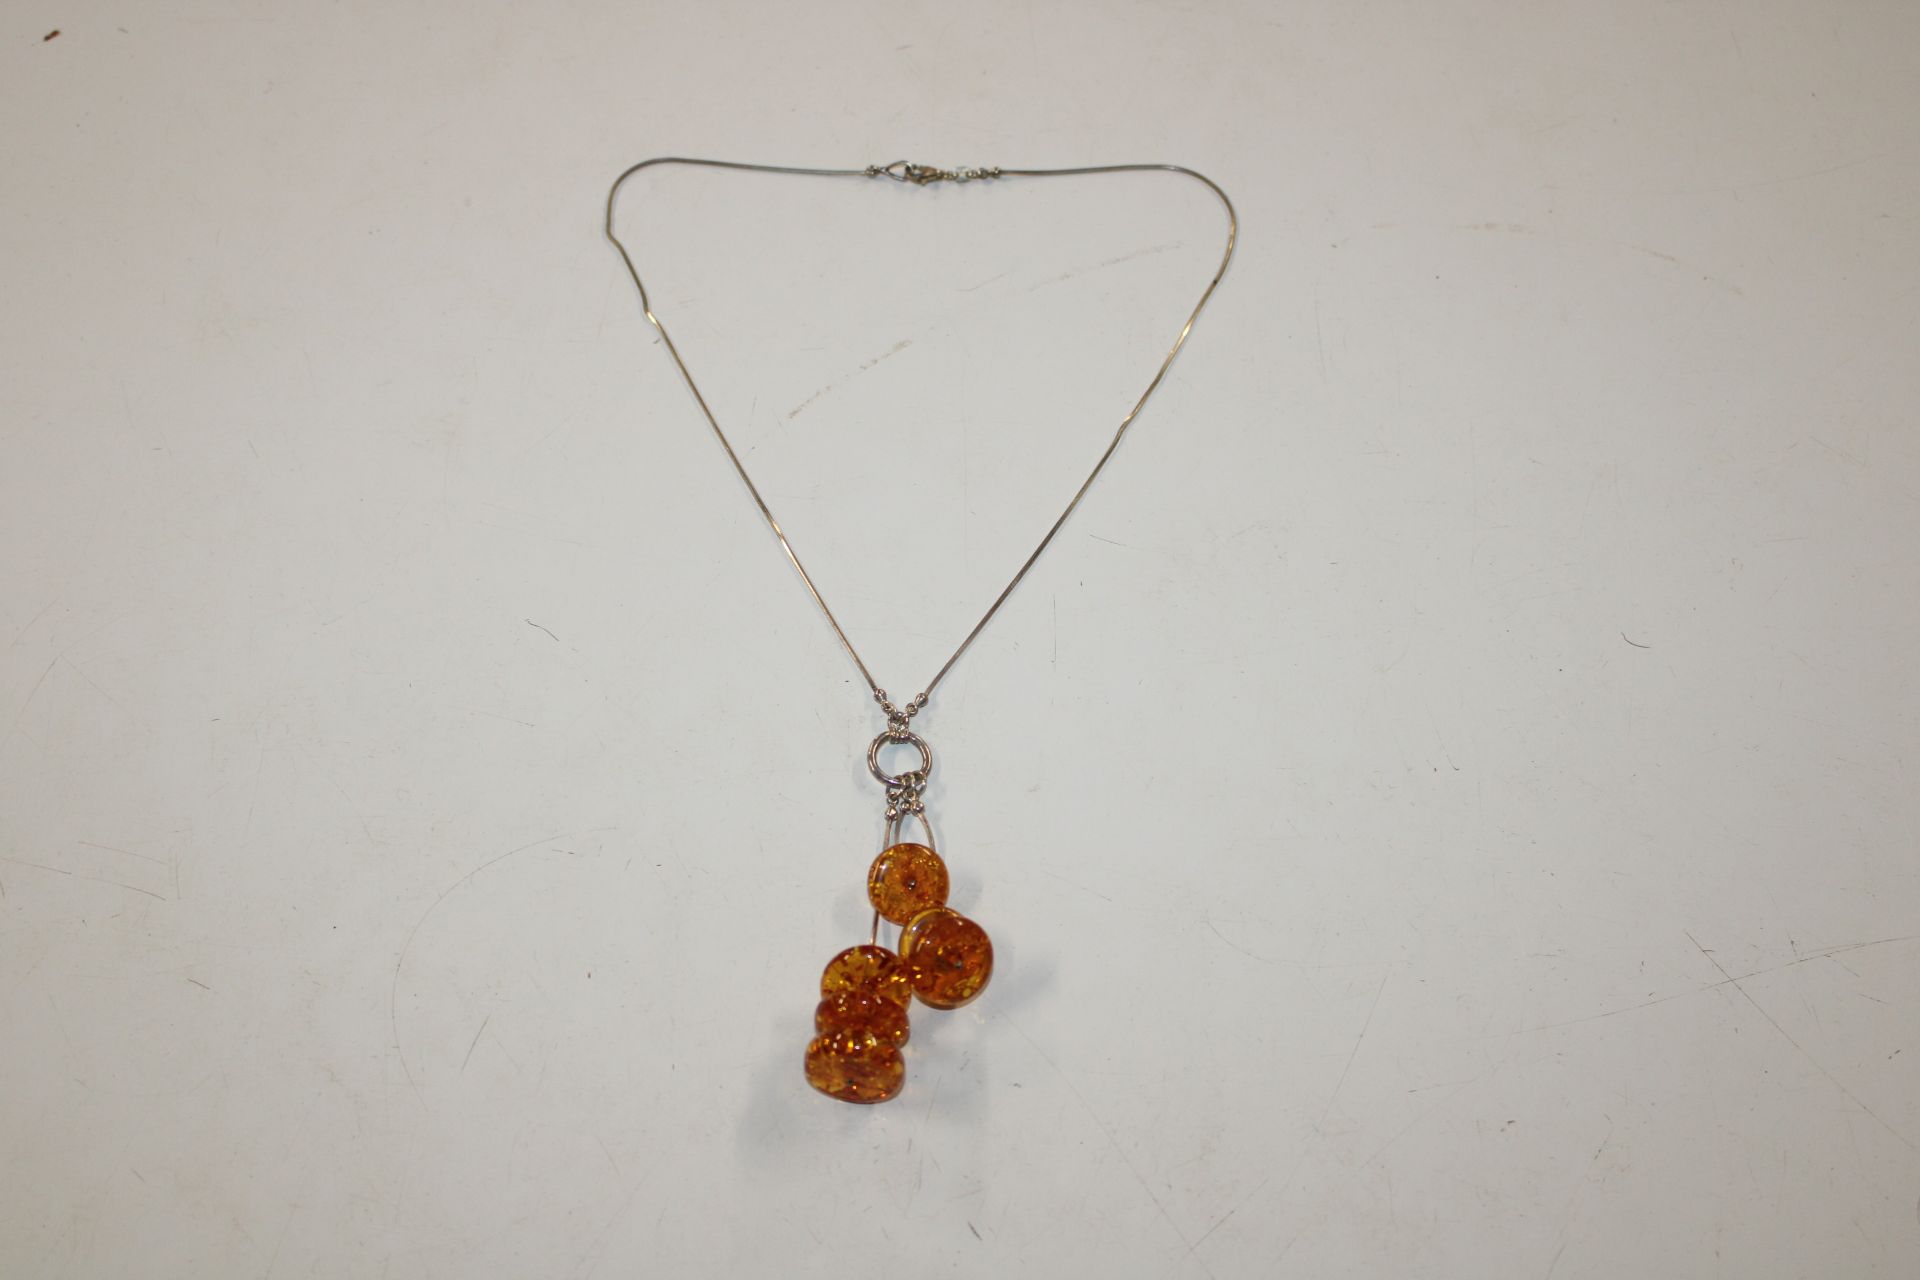 A silver and amber necklace